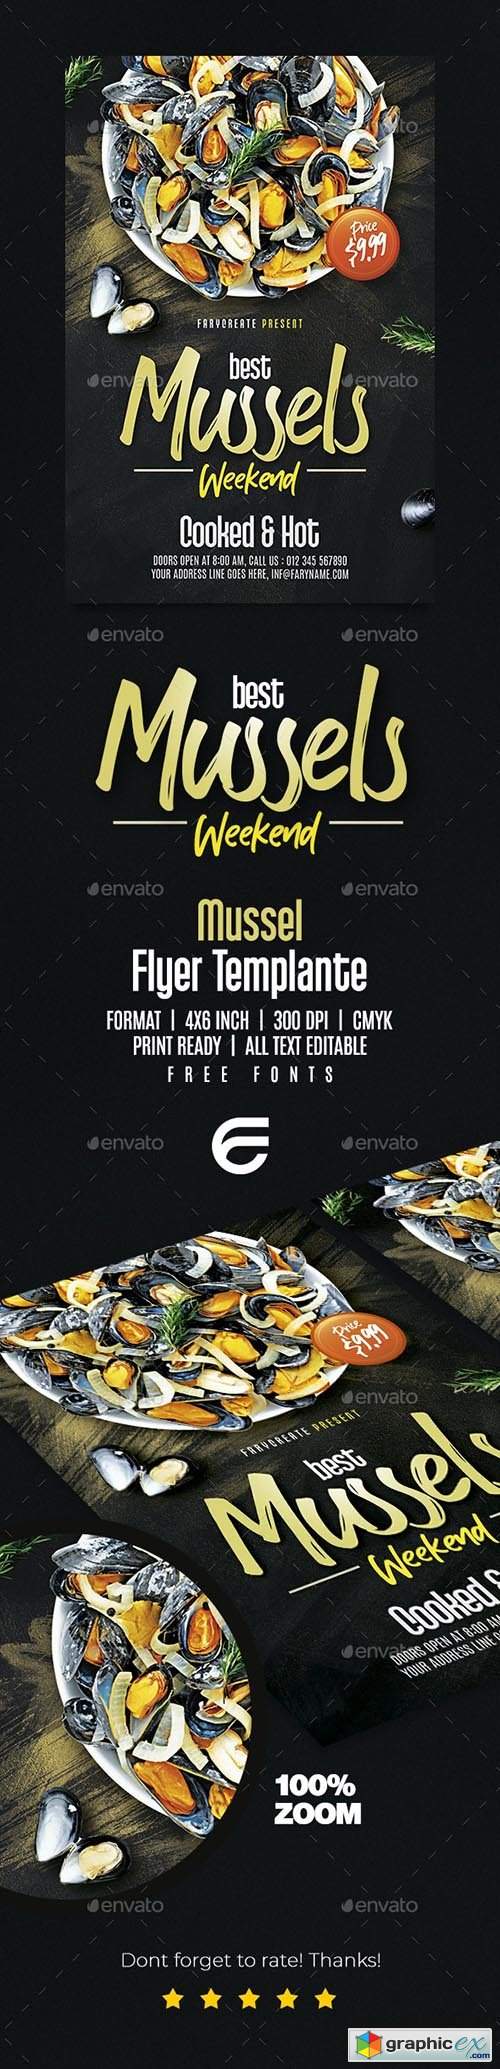 Mussels Seafood Flyer Template 